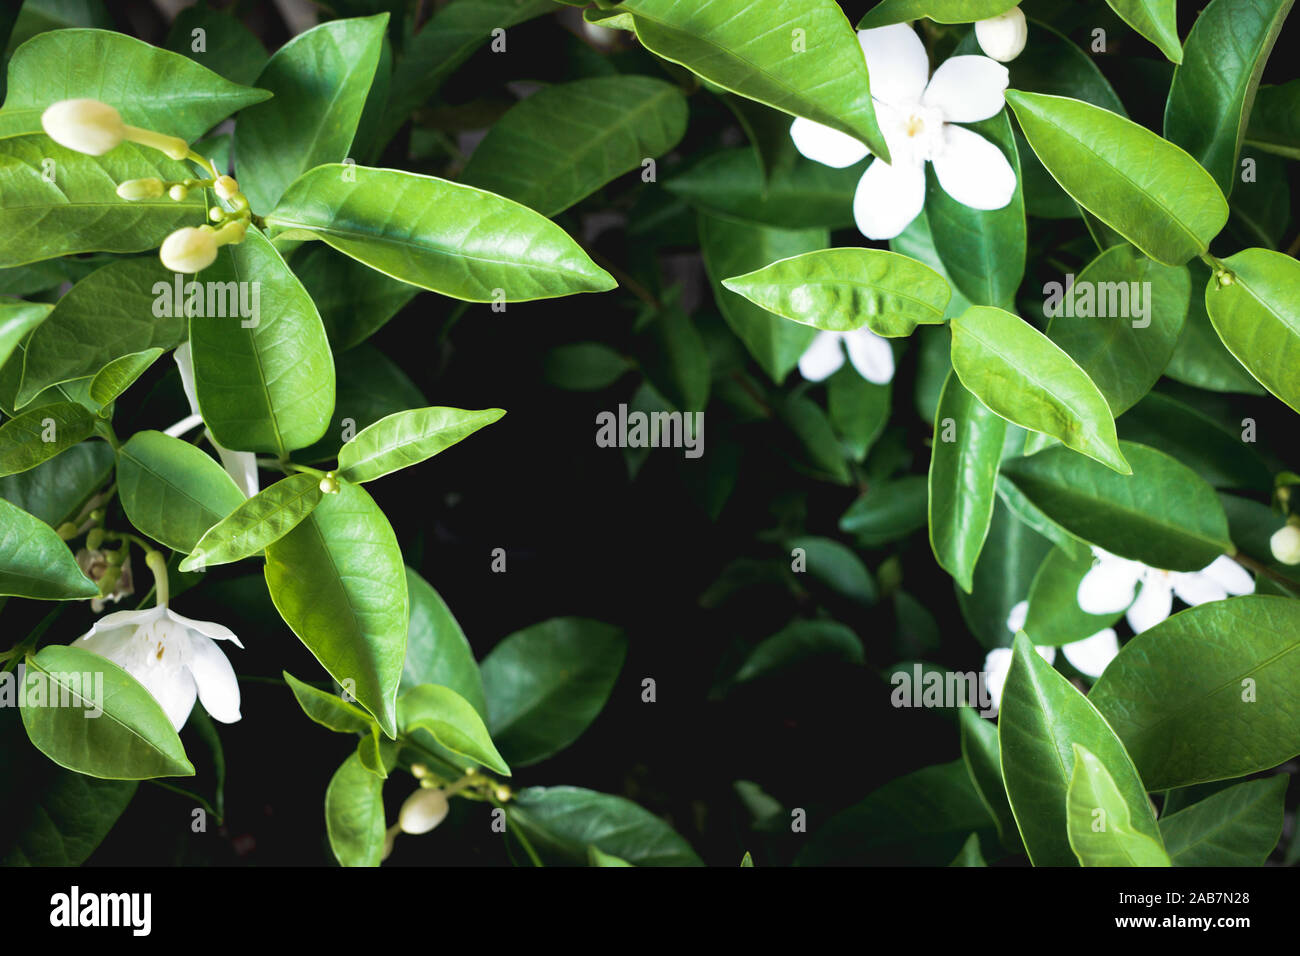 Tropical green leaves plant texture background. Stock Photo